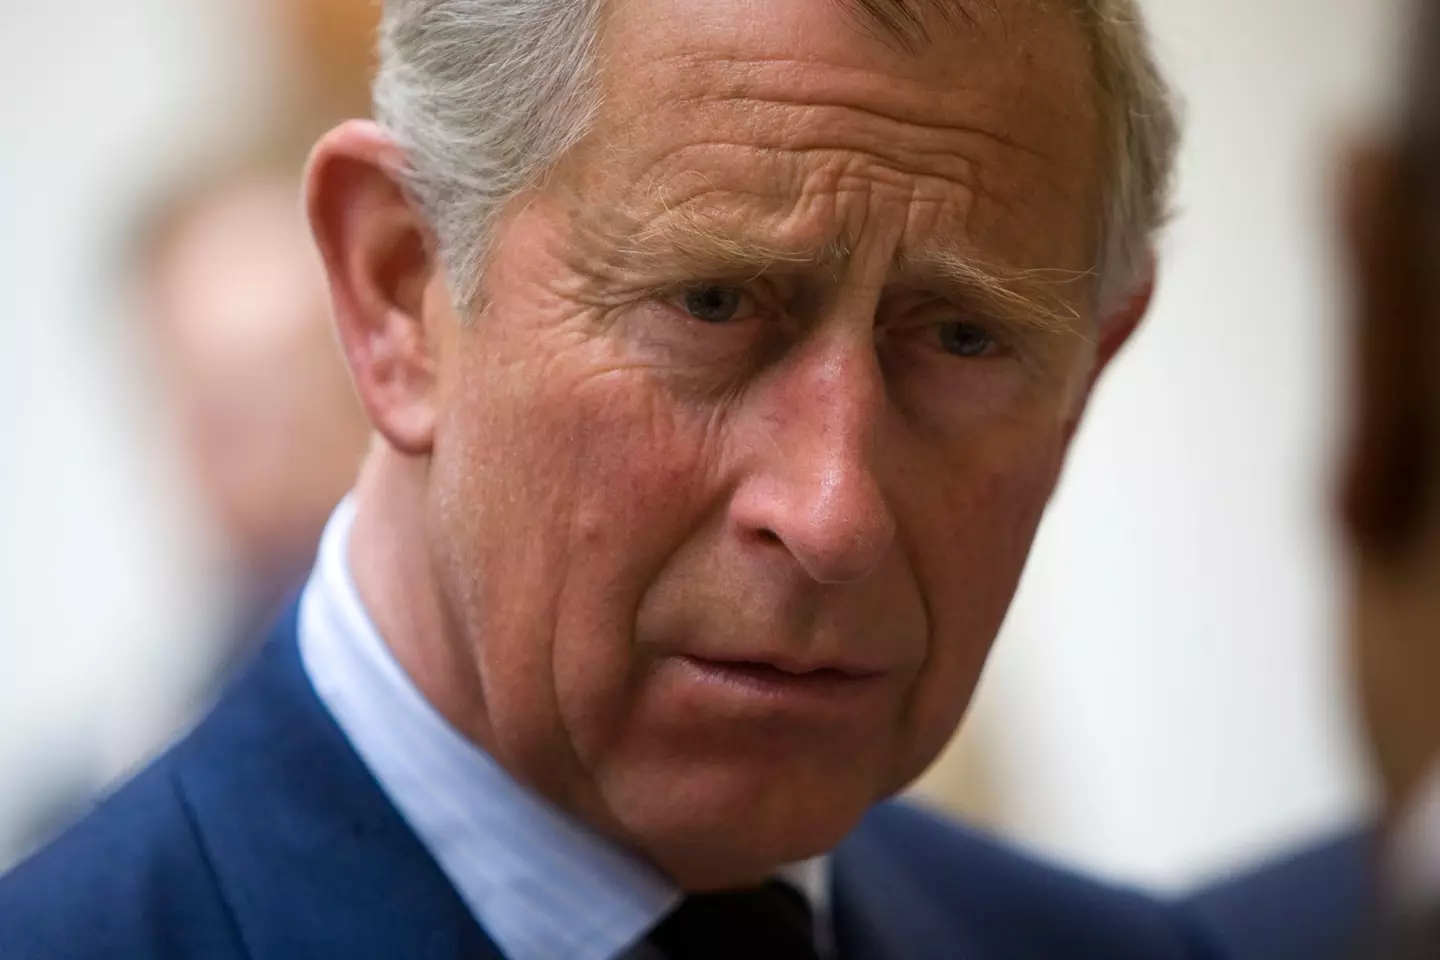 Prince Charles will read his mother's speech on her behalf. (